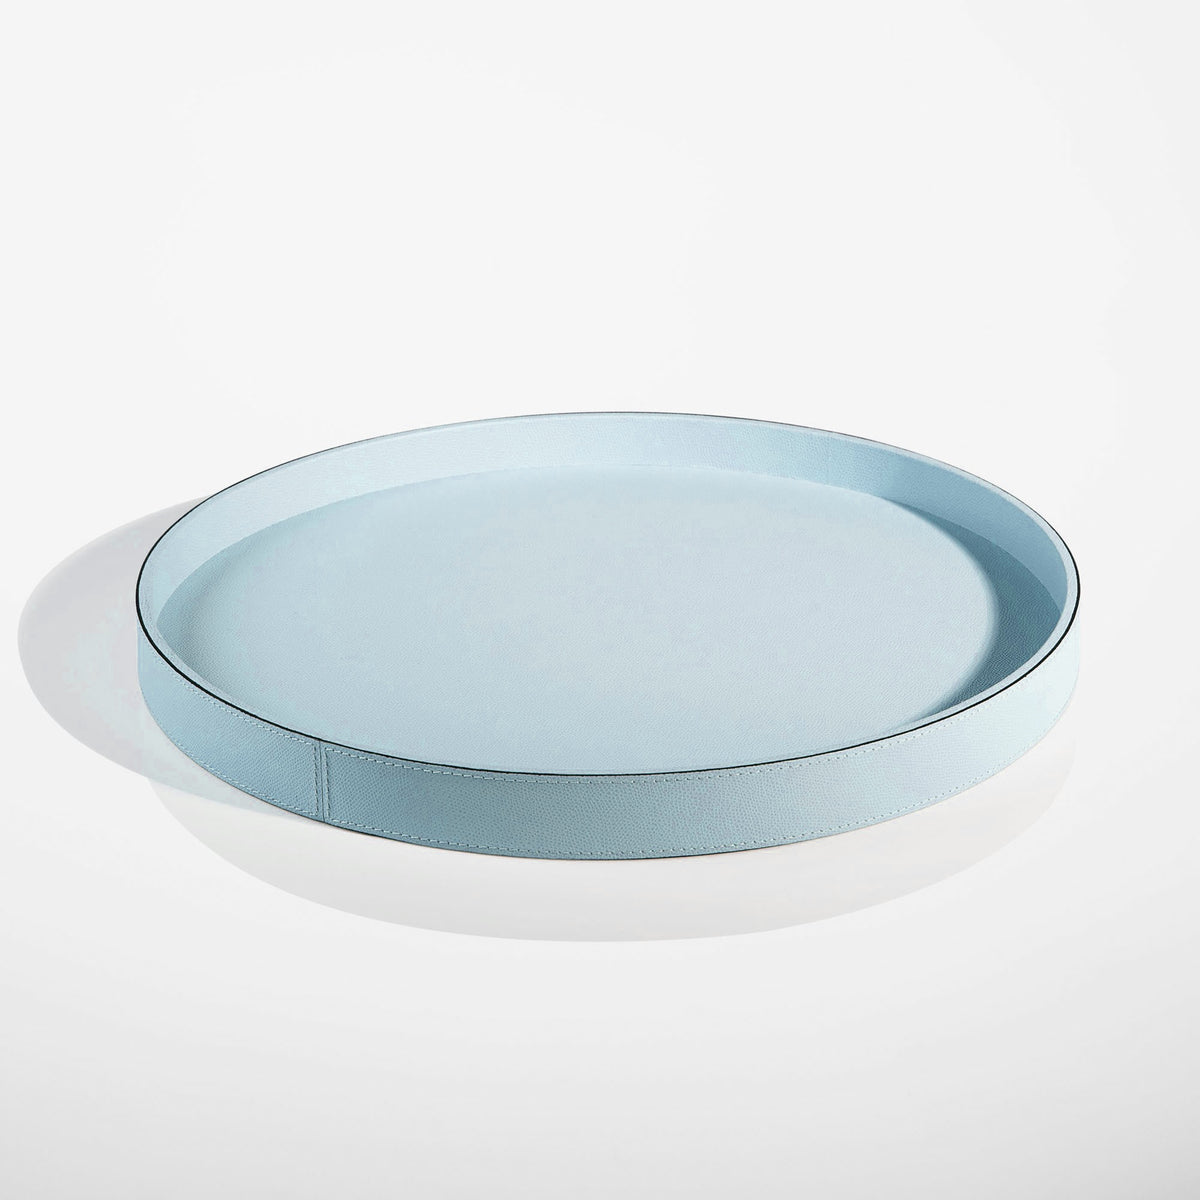 Ebury Round Tray - Light Blue | Luxury Home Accessories & Gifts | LINLEY